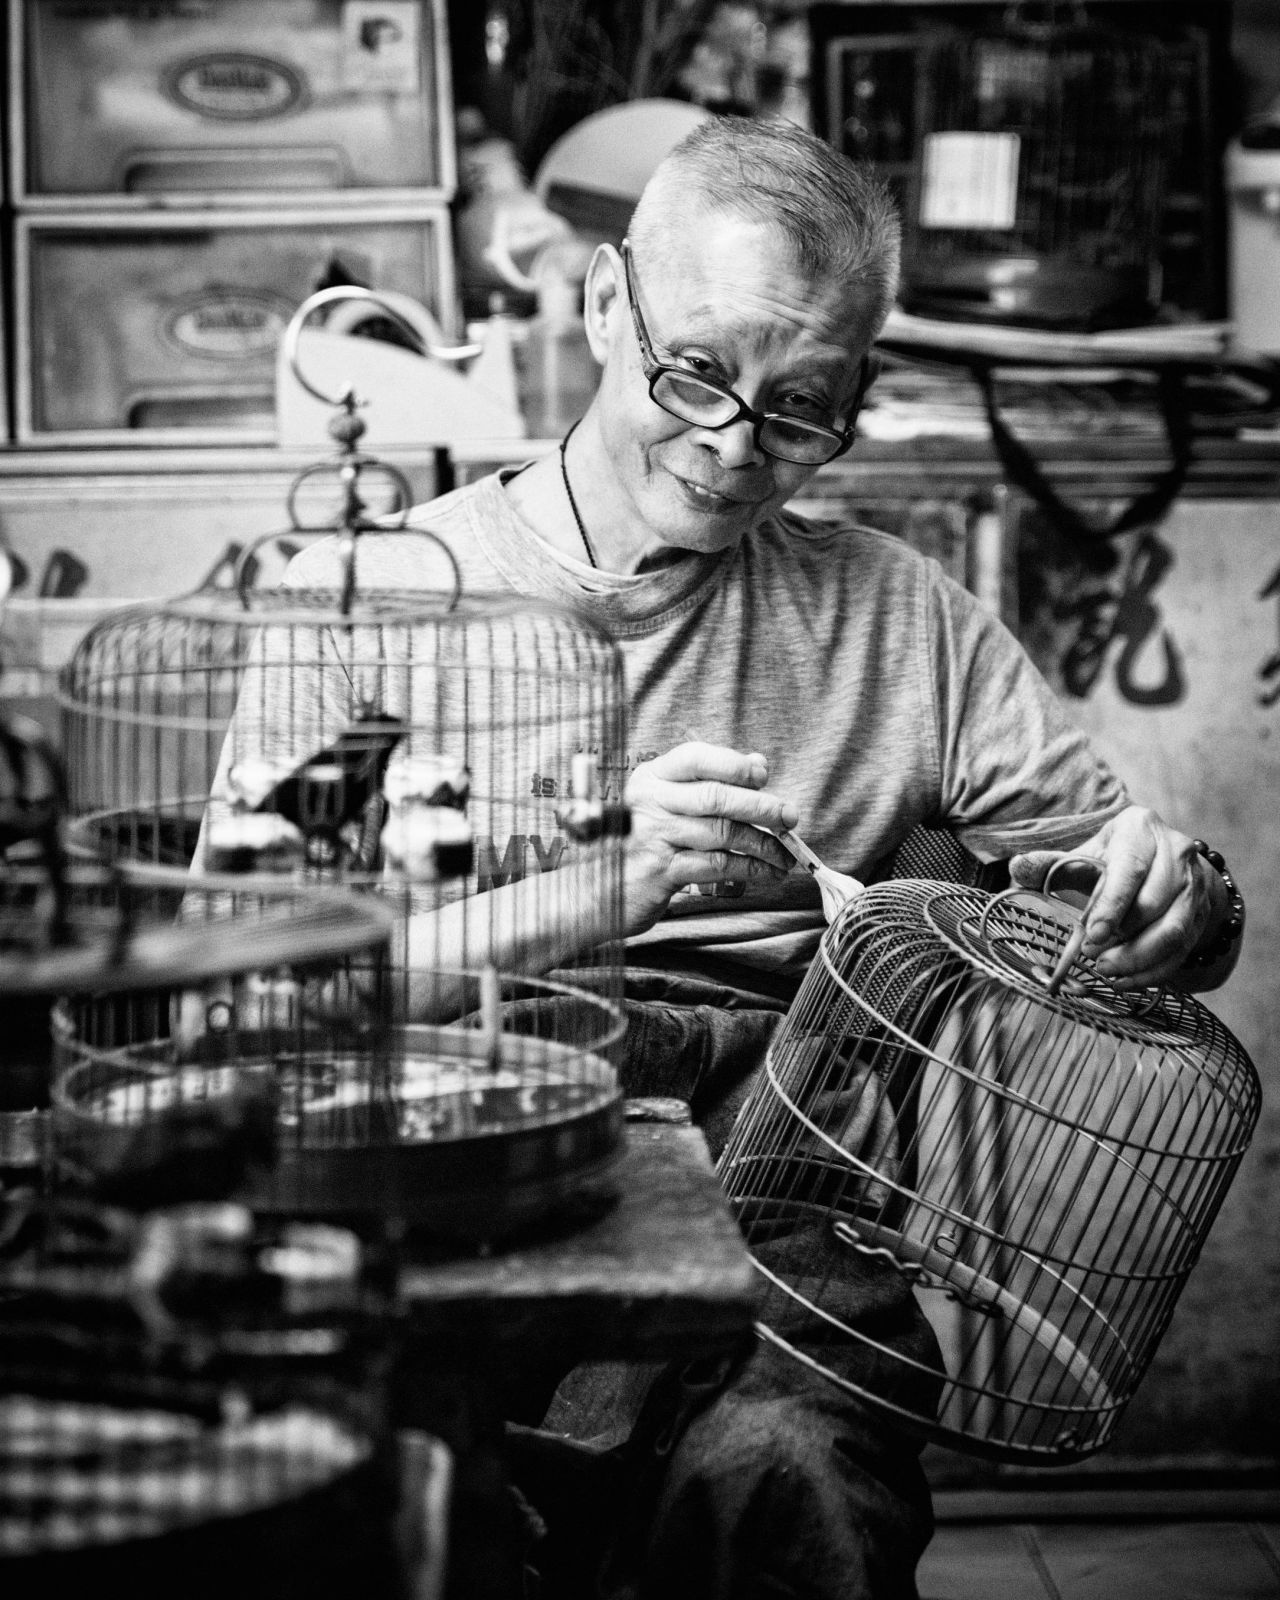 Chan Lok Choi has been making cages since he was 13 years old. He still operates from a small shop in the Yuen Po Street Bird Garden.